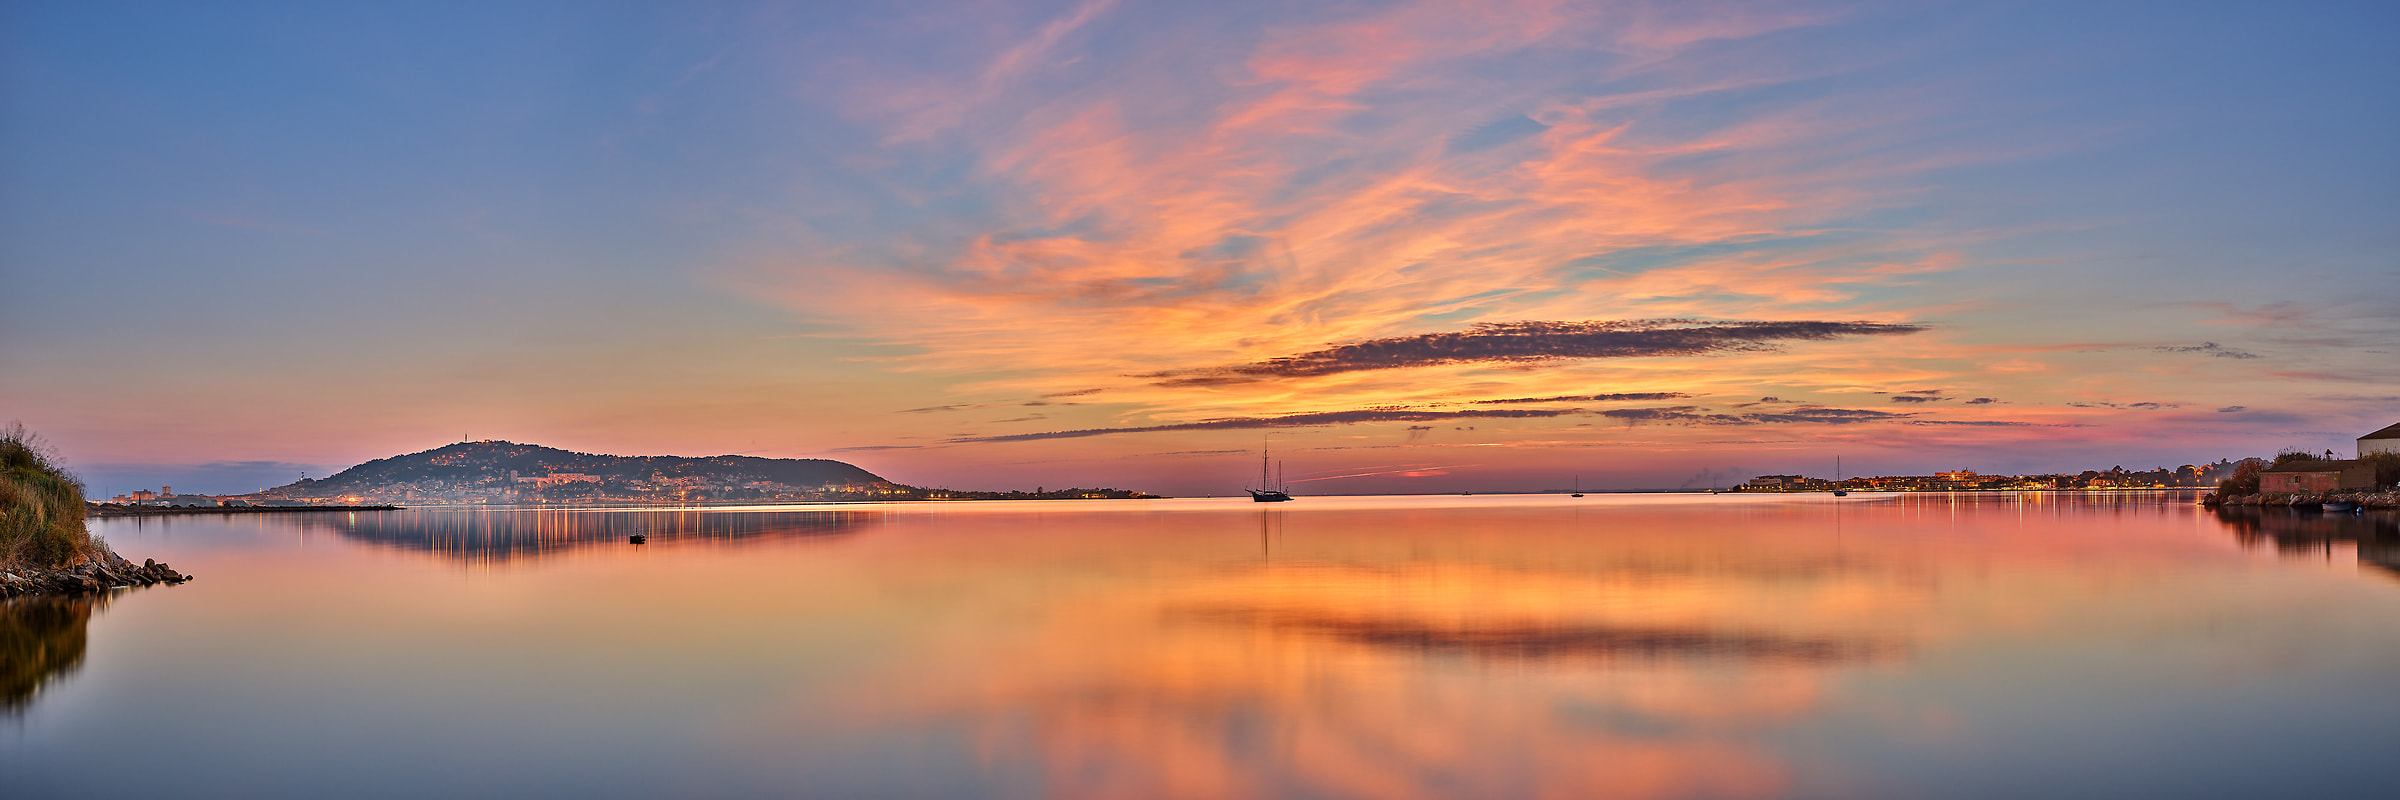 323 megapixels! A very high resolution, large-format VAST photo print of sunset reflecting in the water with a sailboat; landscape photograph created by David Meaux in l'Étang de Thau, Balaruc-les-Bains, l'Hérault, France